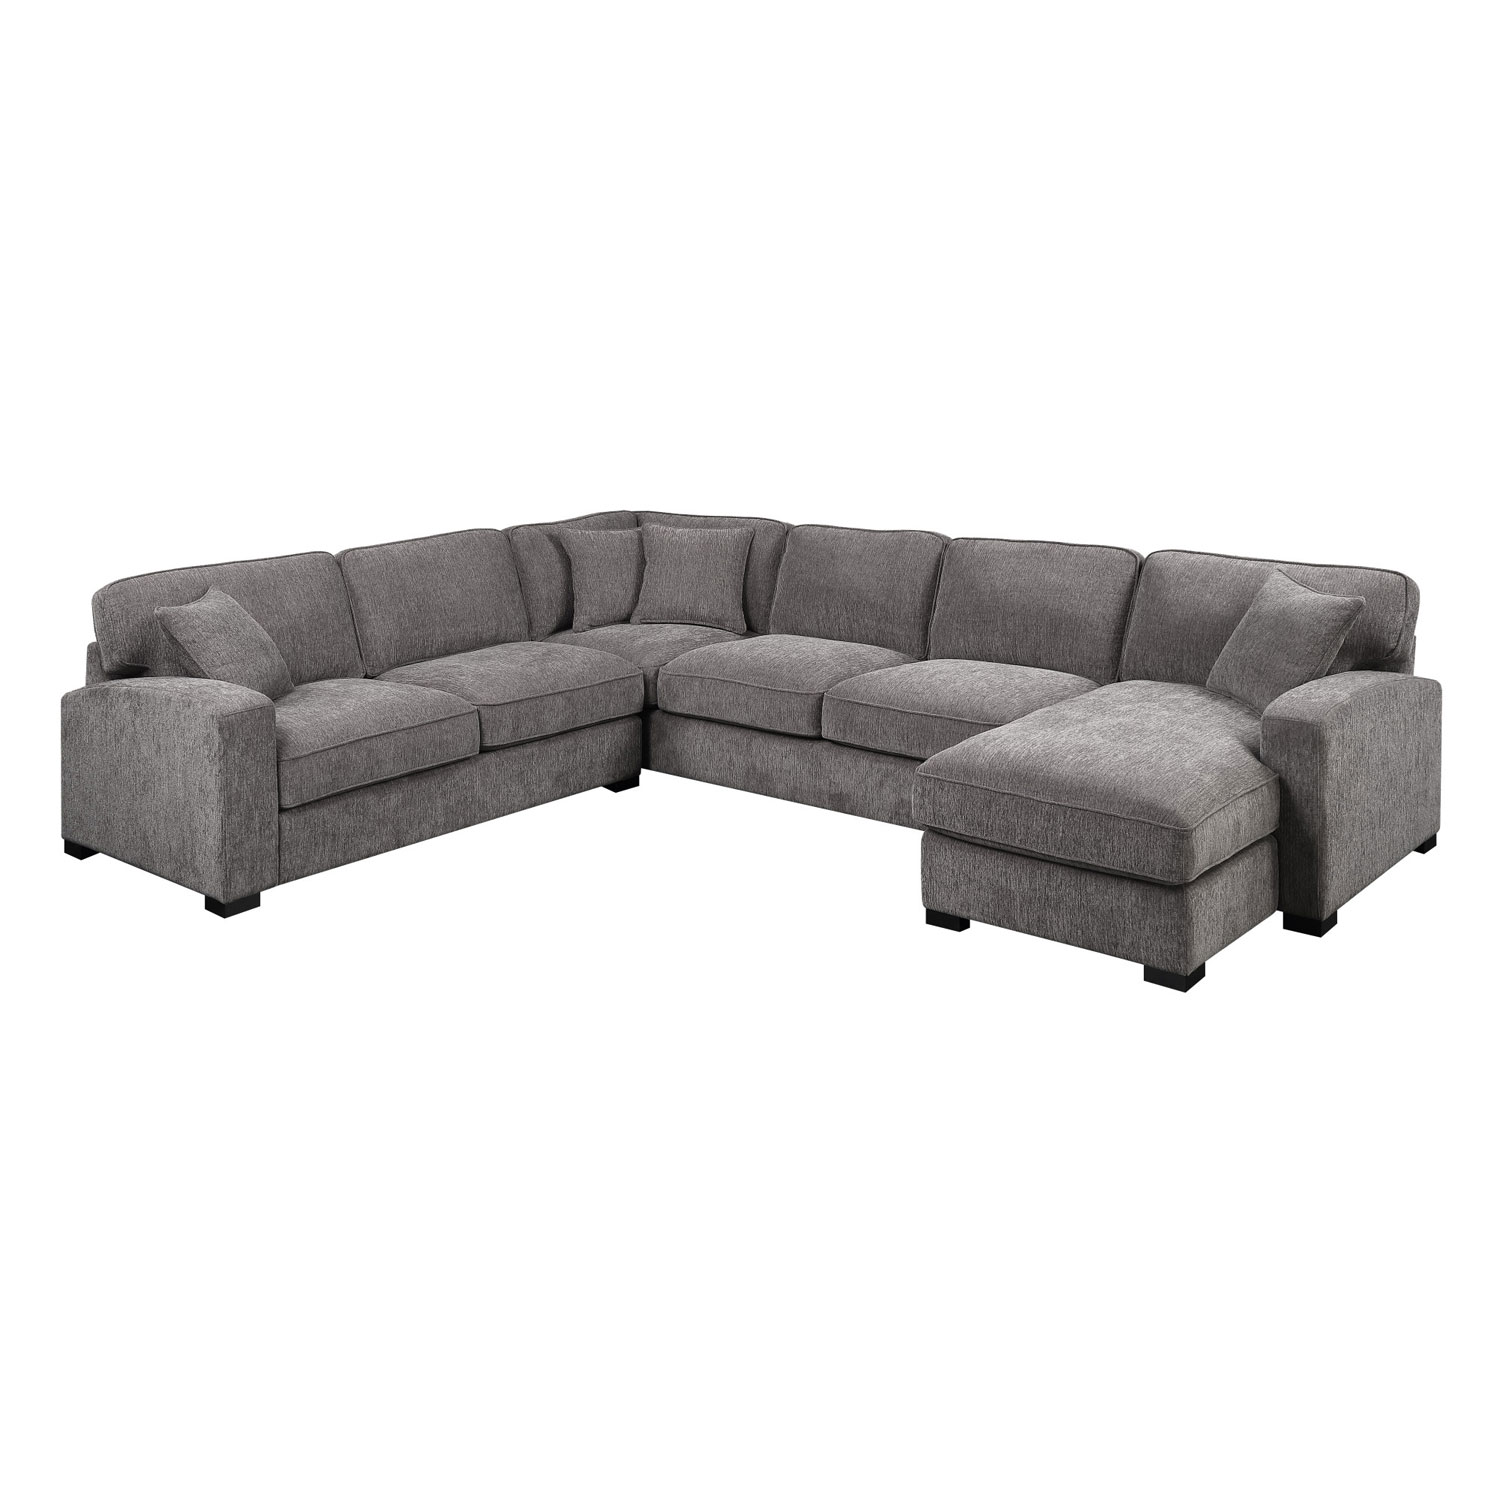 Selby Charcoal Loveseat Corner Sofa Chaise With Four Pillows